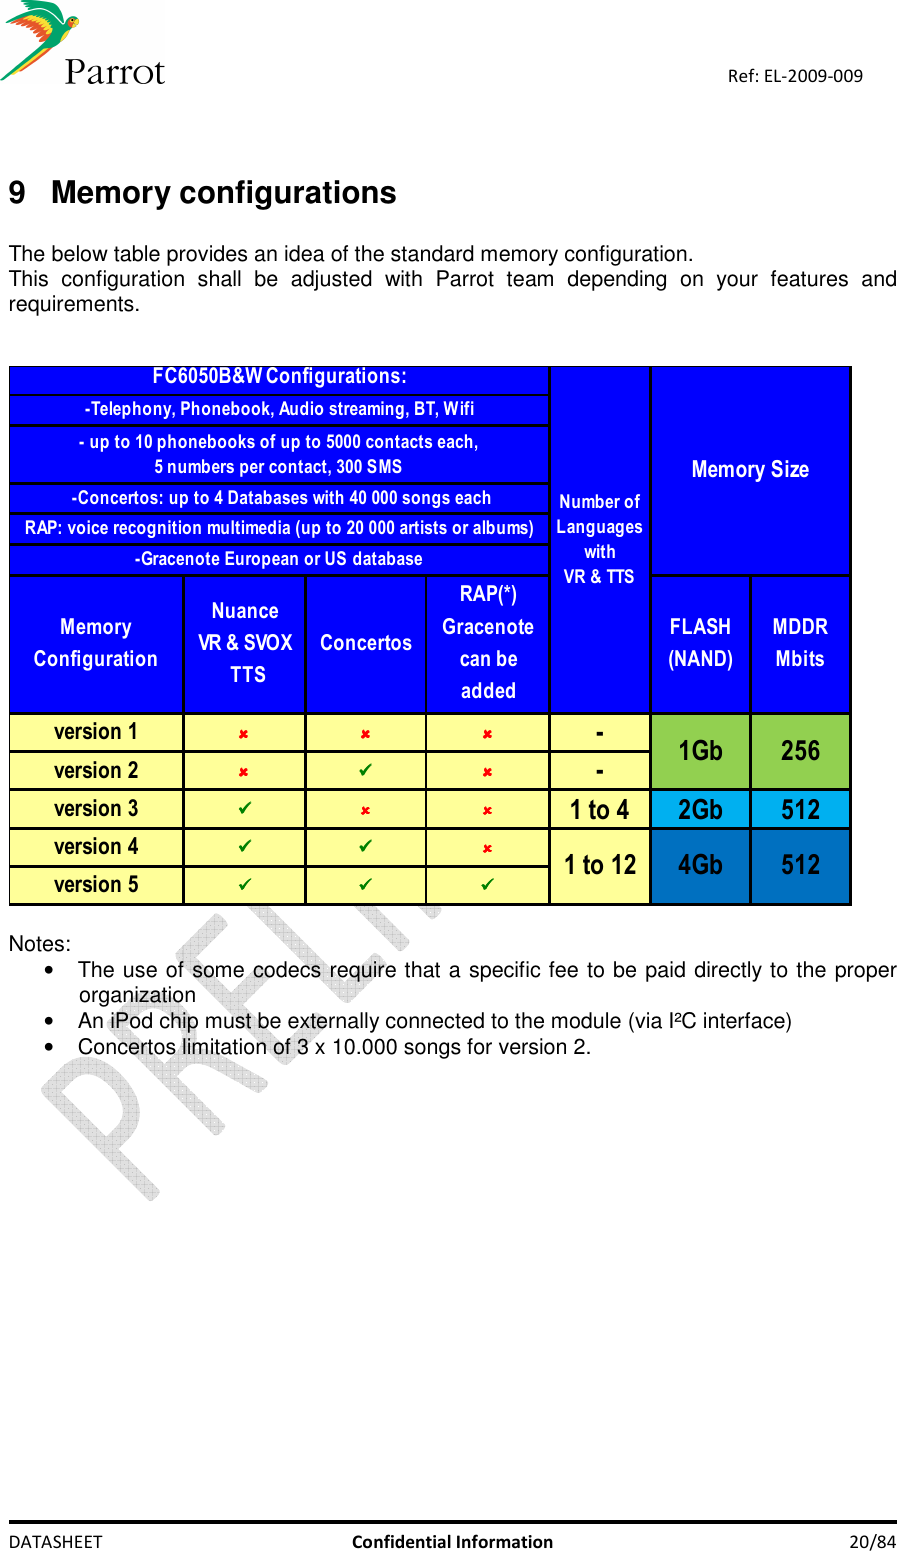    DATASHEET  Confidential Information  20/84 Ref: EL-2009-009   9  Memory configurations  The below table provides an idea of the standard memory configuration. This  configuration  shall  be  adjusted  with  Parrot  team  depending  on  your  features  and requirements.    MemoryConfigurationNuanceVR &amp; SVOX TTSConcertosRAP(*)Gracenote can be addedFLASH(NAND)MDDRMbitsversion 1  -version 2-version 3 1 to 4 2Gb 512version 4 version 5  2561Gb5124Gb1 to 12FC6050B&amp;W Configurations: Number of Languages with VR &amp; TTSMemory Size-Telephony, Phonebook, Audio streaming, BT, Wifi- up to 10 phonebooks of up to 5000 contacts each, 5 numbers per contact, 300 SMS -Concertos: up to 4 Databases with 40 000 songs eachRAP: voice recognition multimedia (up to 20 000 artists or albums) -Gracenote European or US database  Notes:  •  The use of some codecs require that a specific fee to be paid directly to the proper organization •  An iPod chip must be externally connected to the module (via I²C interface) •  Concertos limitation of 3 x 10.000 songs for version 2.  